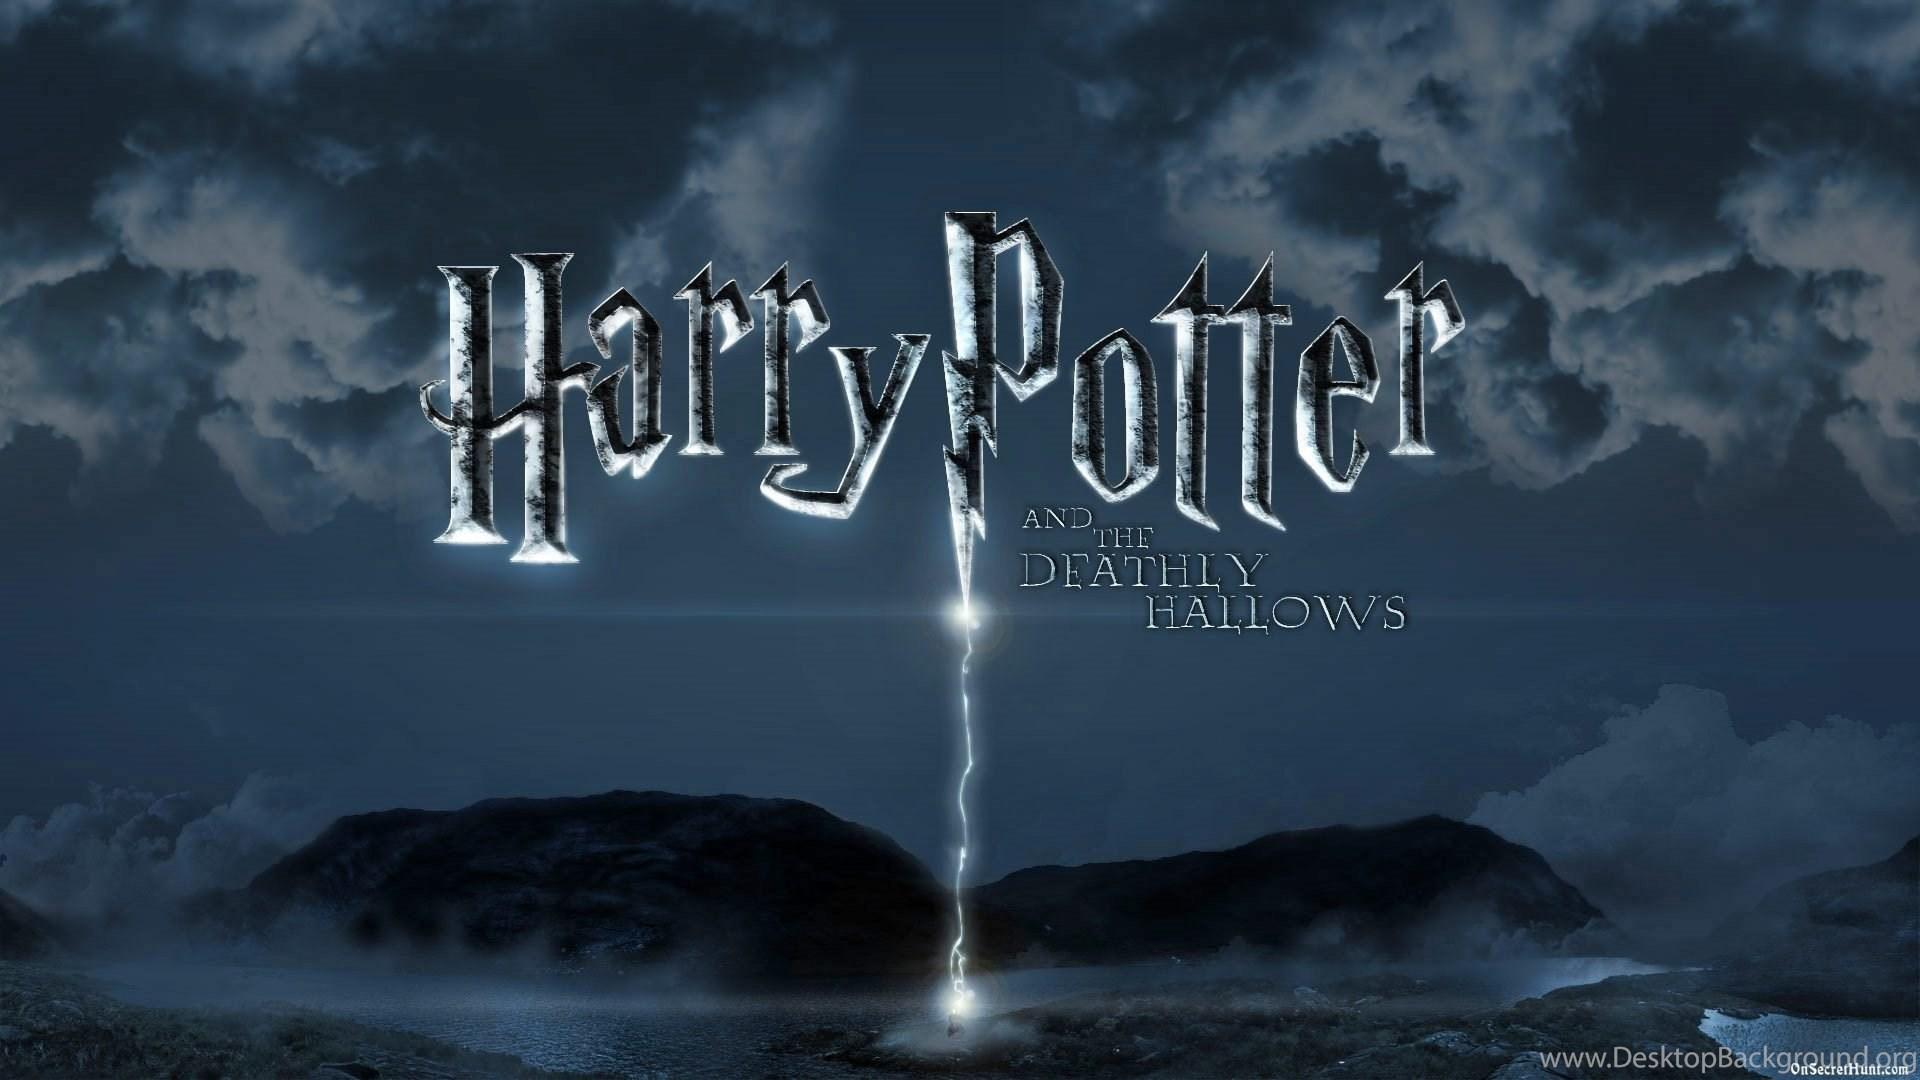 WallpaperMISC Potter and the Deathly Hallows HD Wallpaper